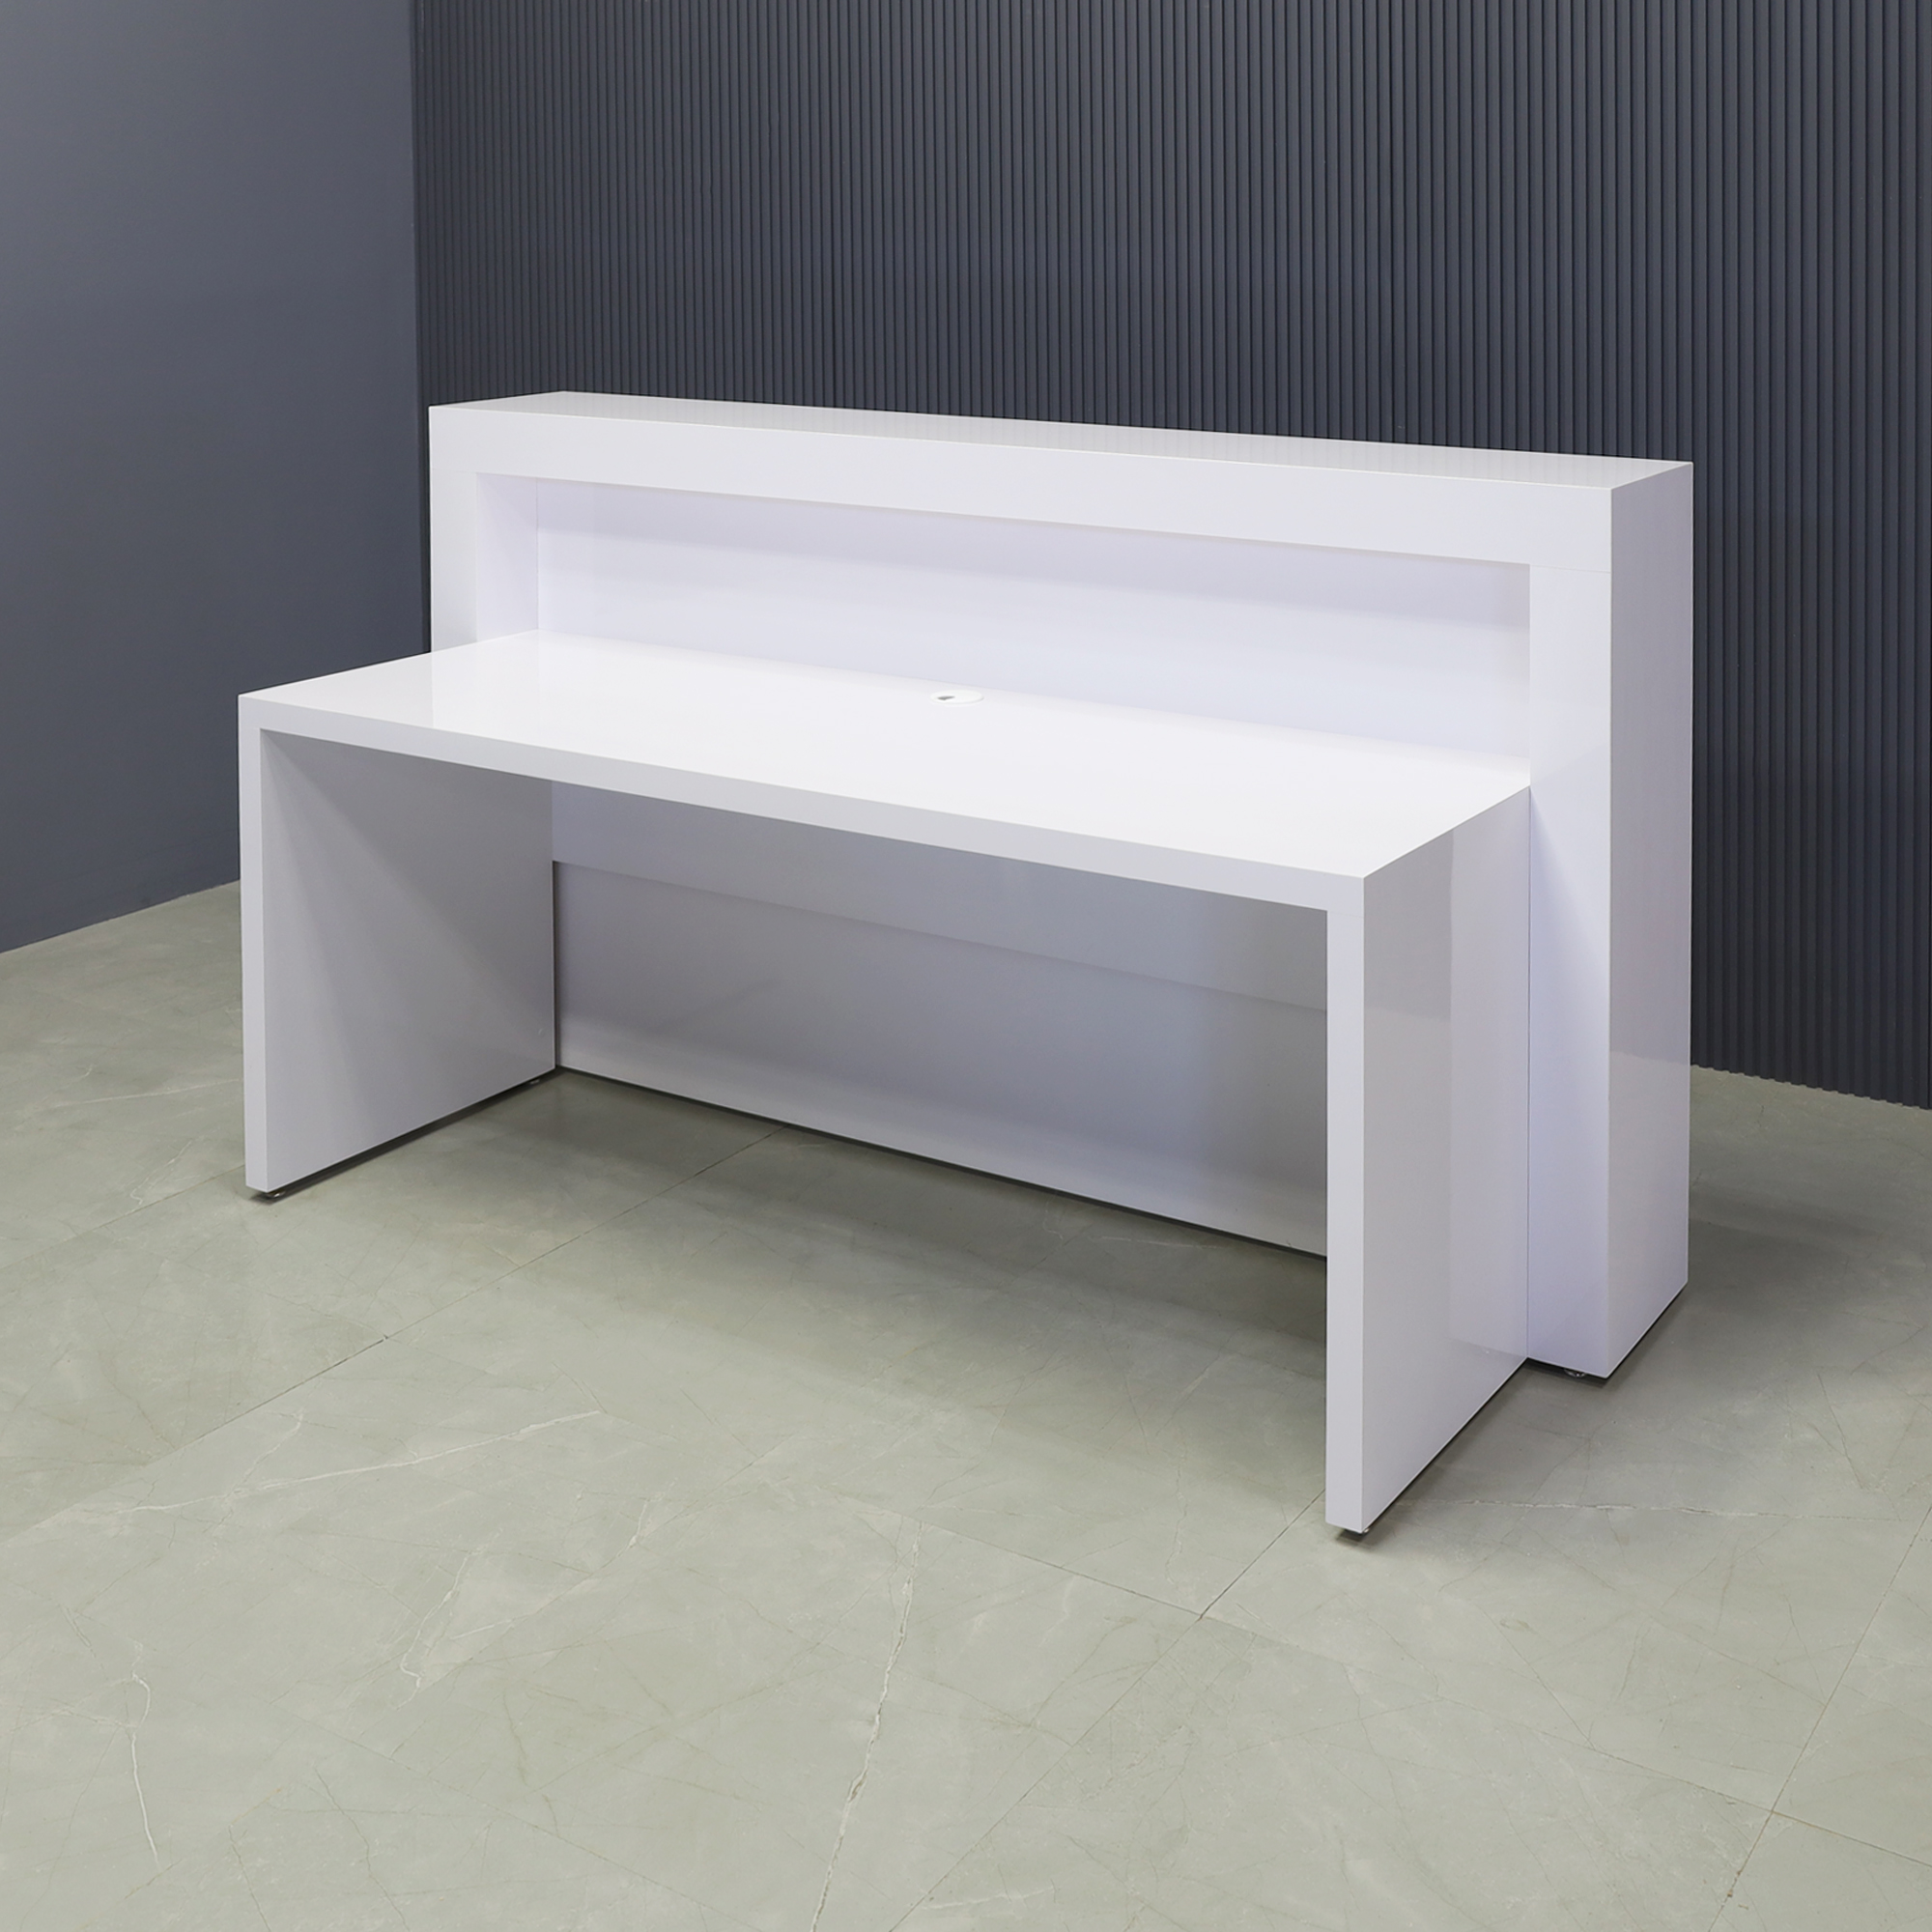 72-inch New York Straight Reception Desk in white gloss laminate finish, with multi-colored LED, shown here.